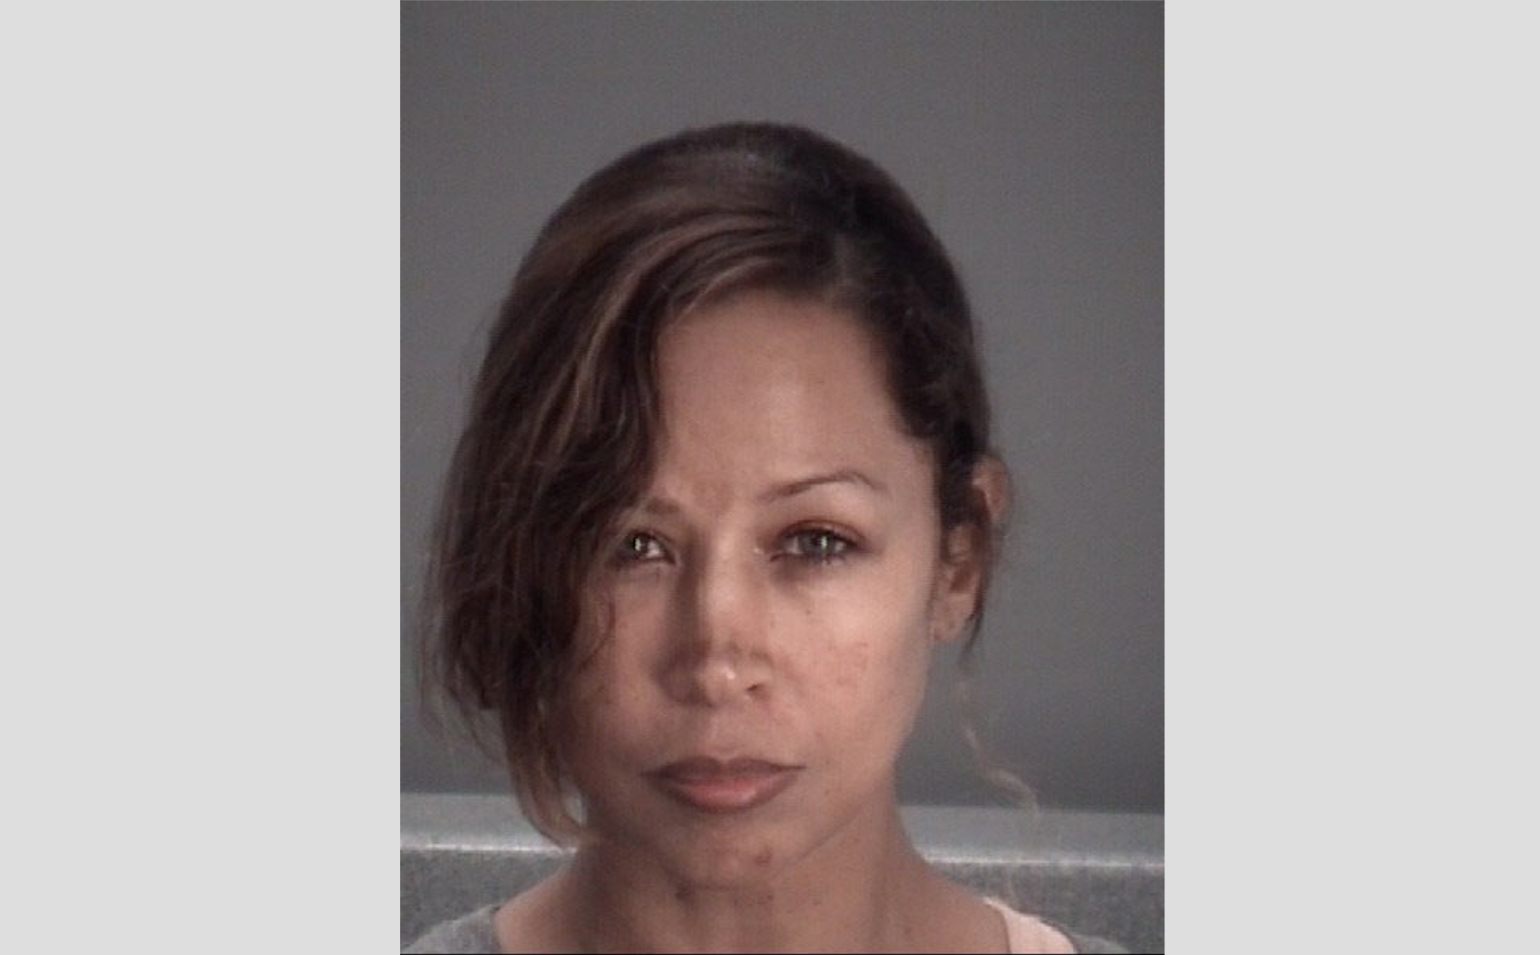 Video of Stacey Dash's Domestic Violence Arrest Released